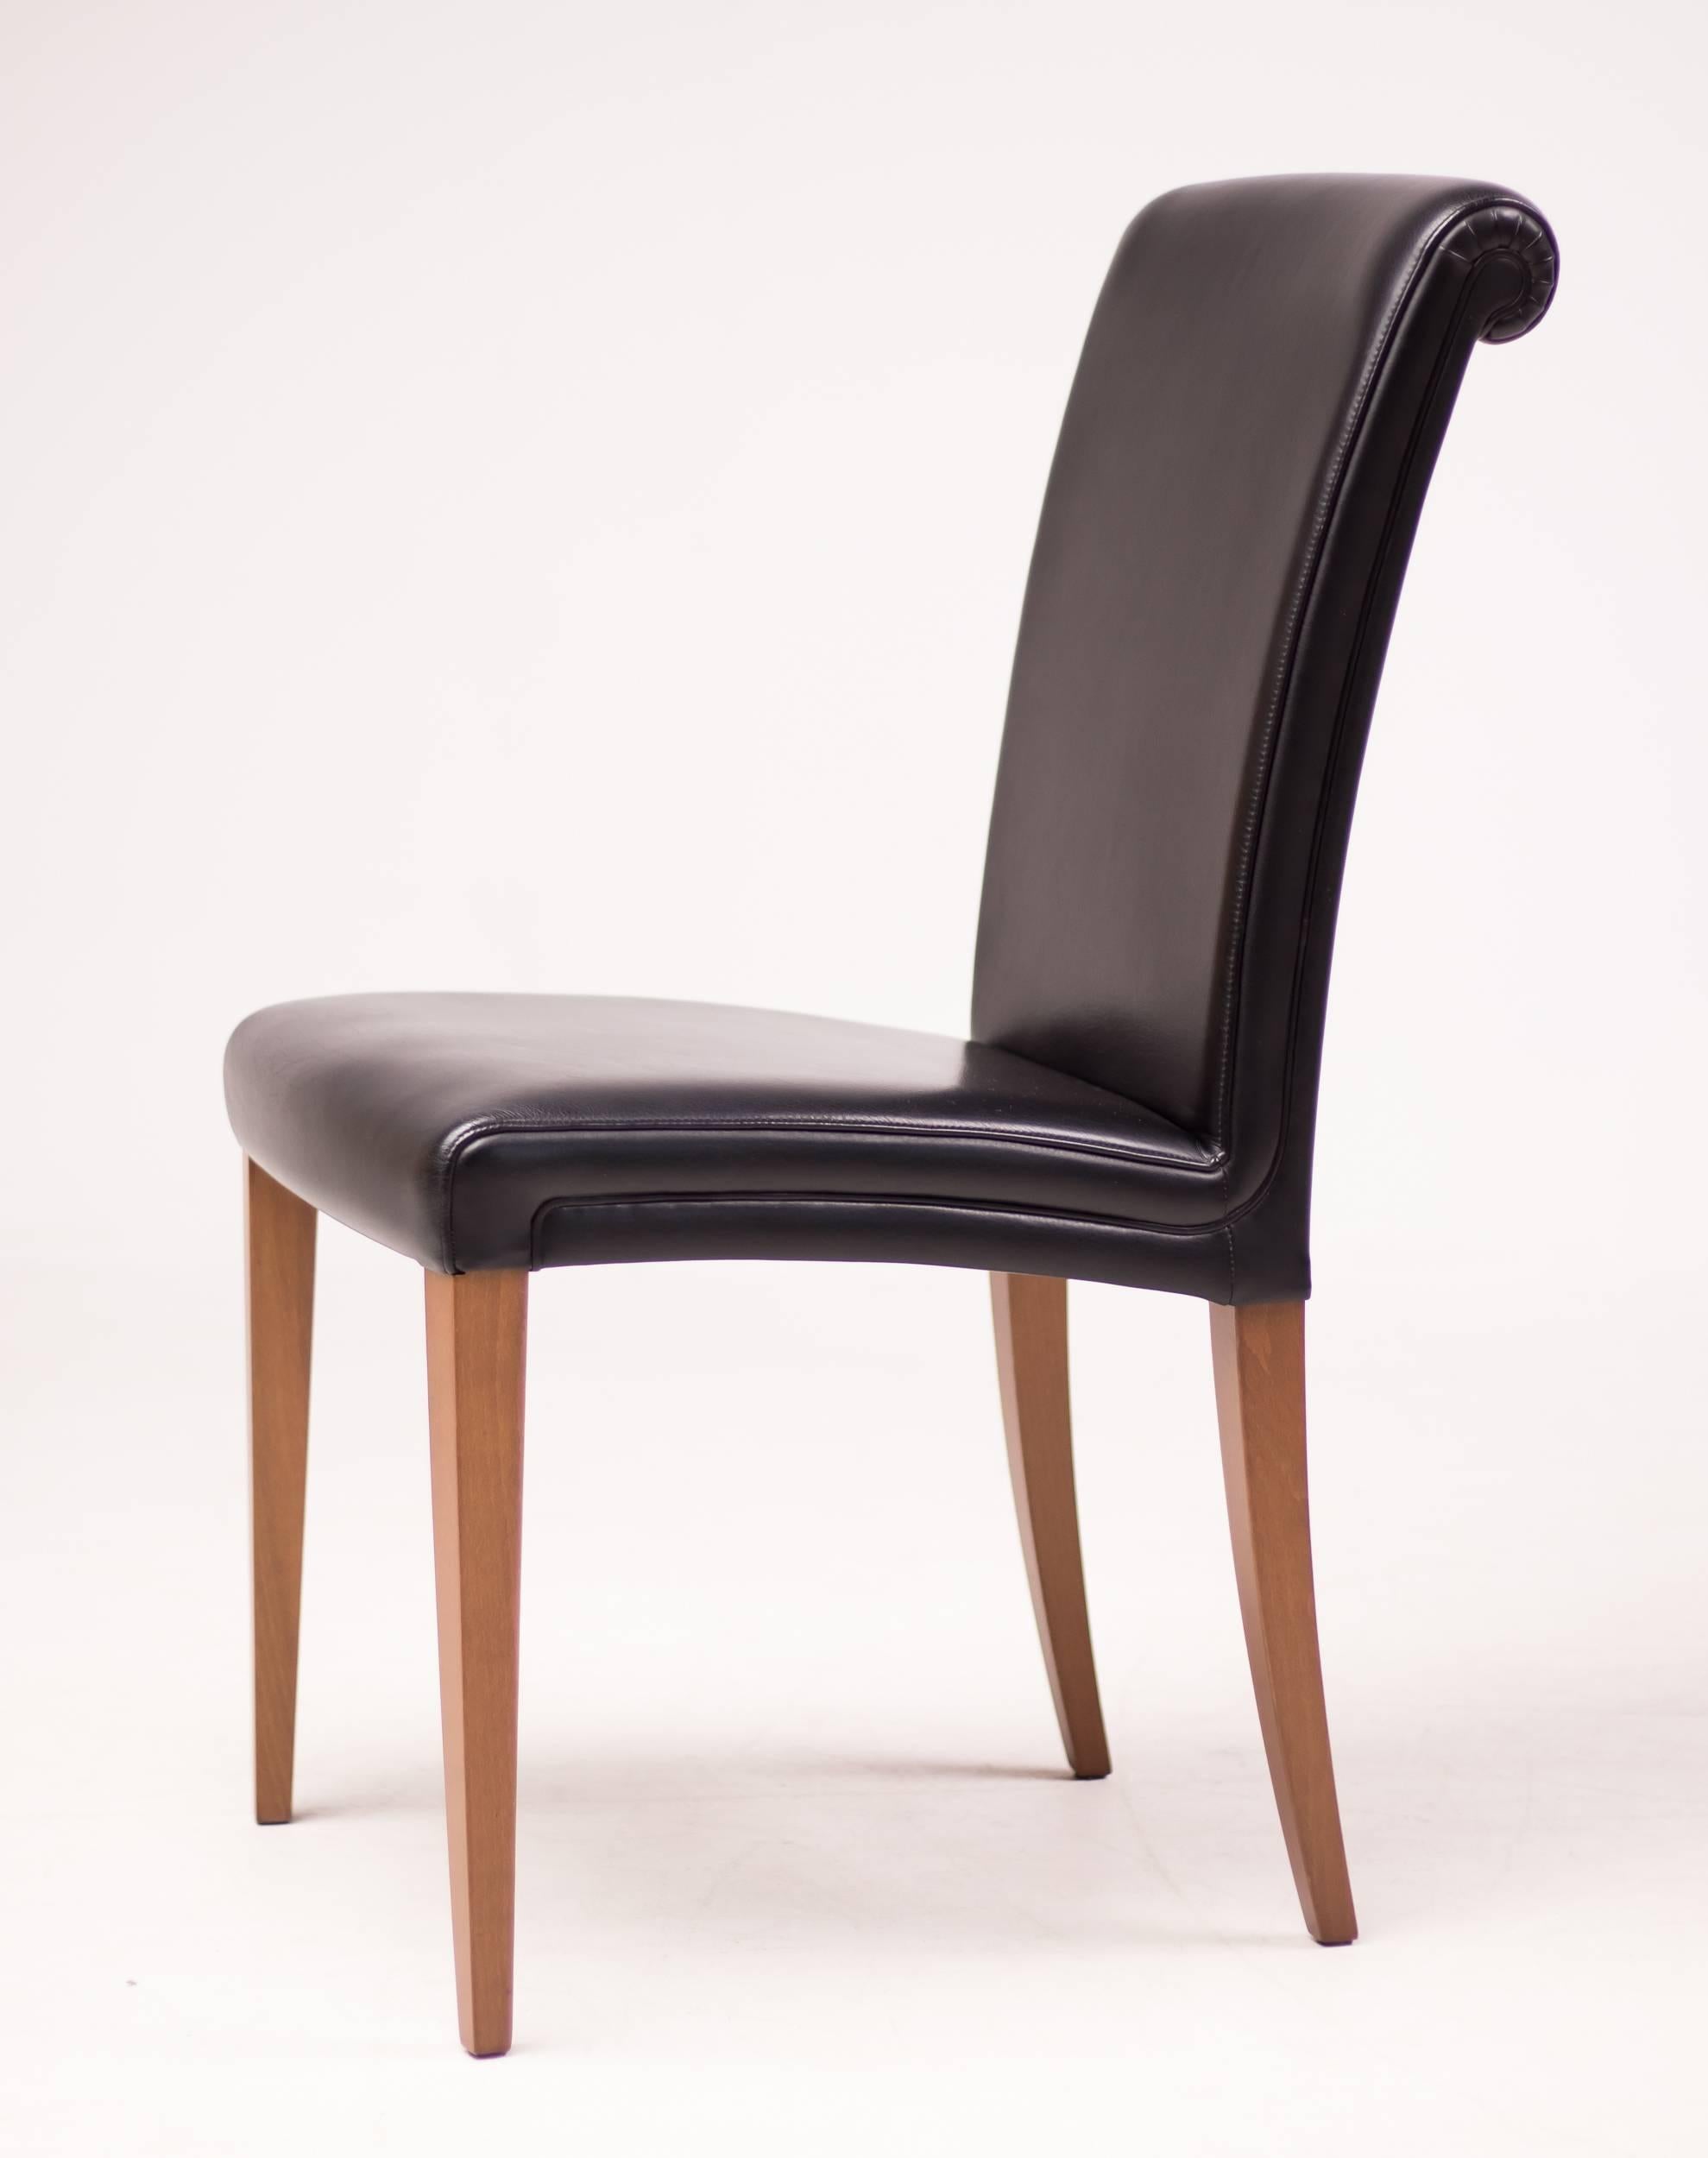 These elegant dining chairs are upholstered in black Pelle Frau leather. The birch legs are stained in cherry. They are in excellent original condition. Marked.

Excellent fast and affordable worldwide shipping.
White glove delivery available